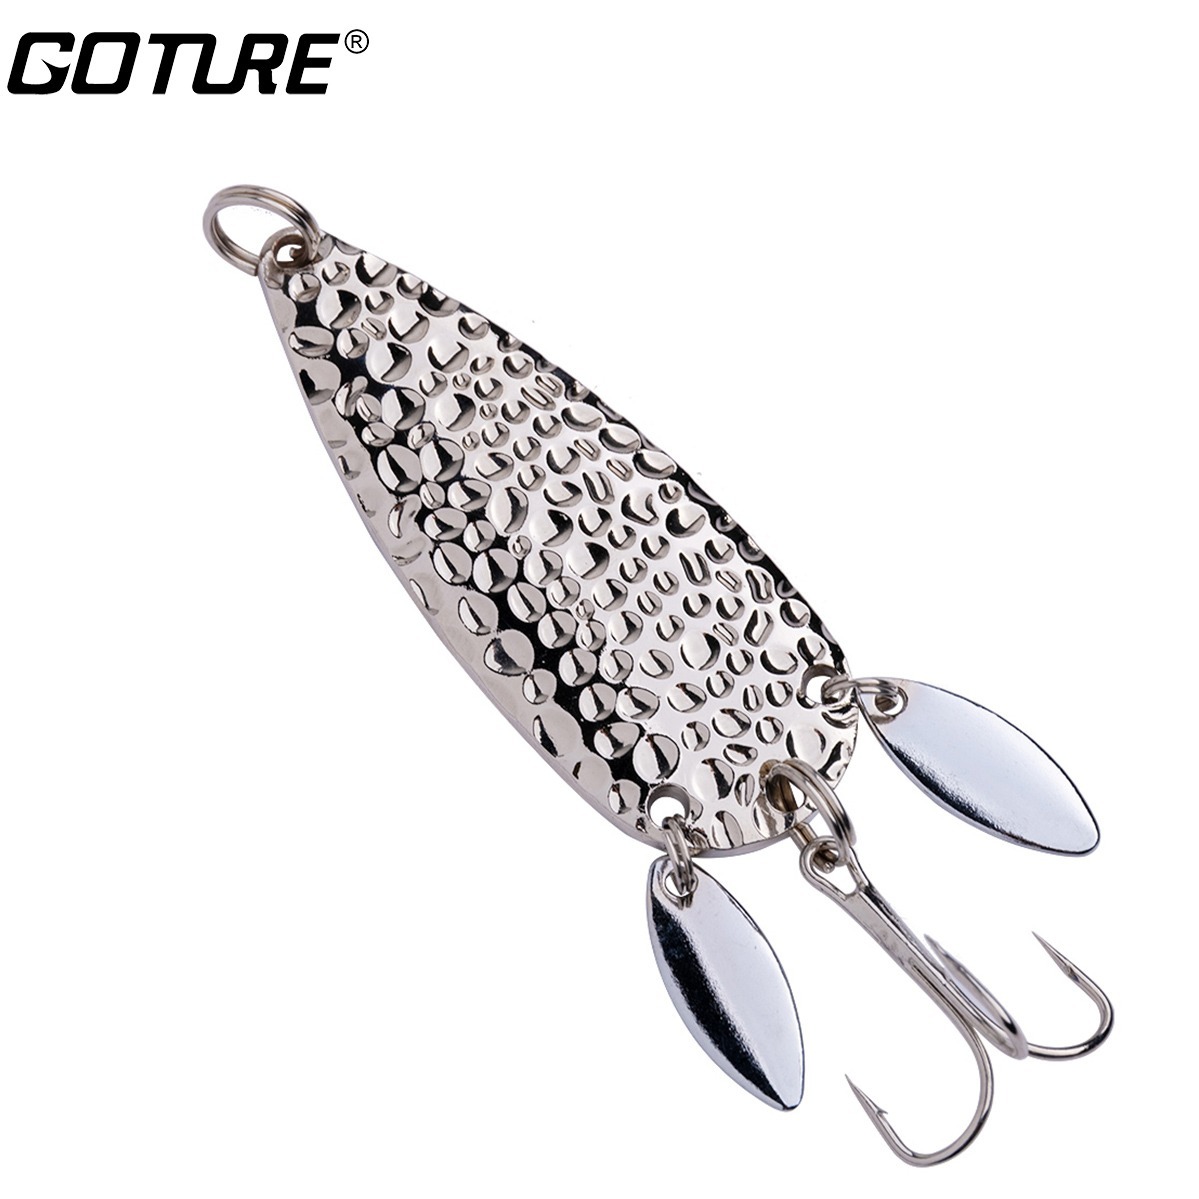 * 1pc Spinning Jig Fishing Spoon Lure Zinc Alloy Body Fishing Accessories,  24g/0.85oz